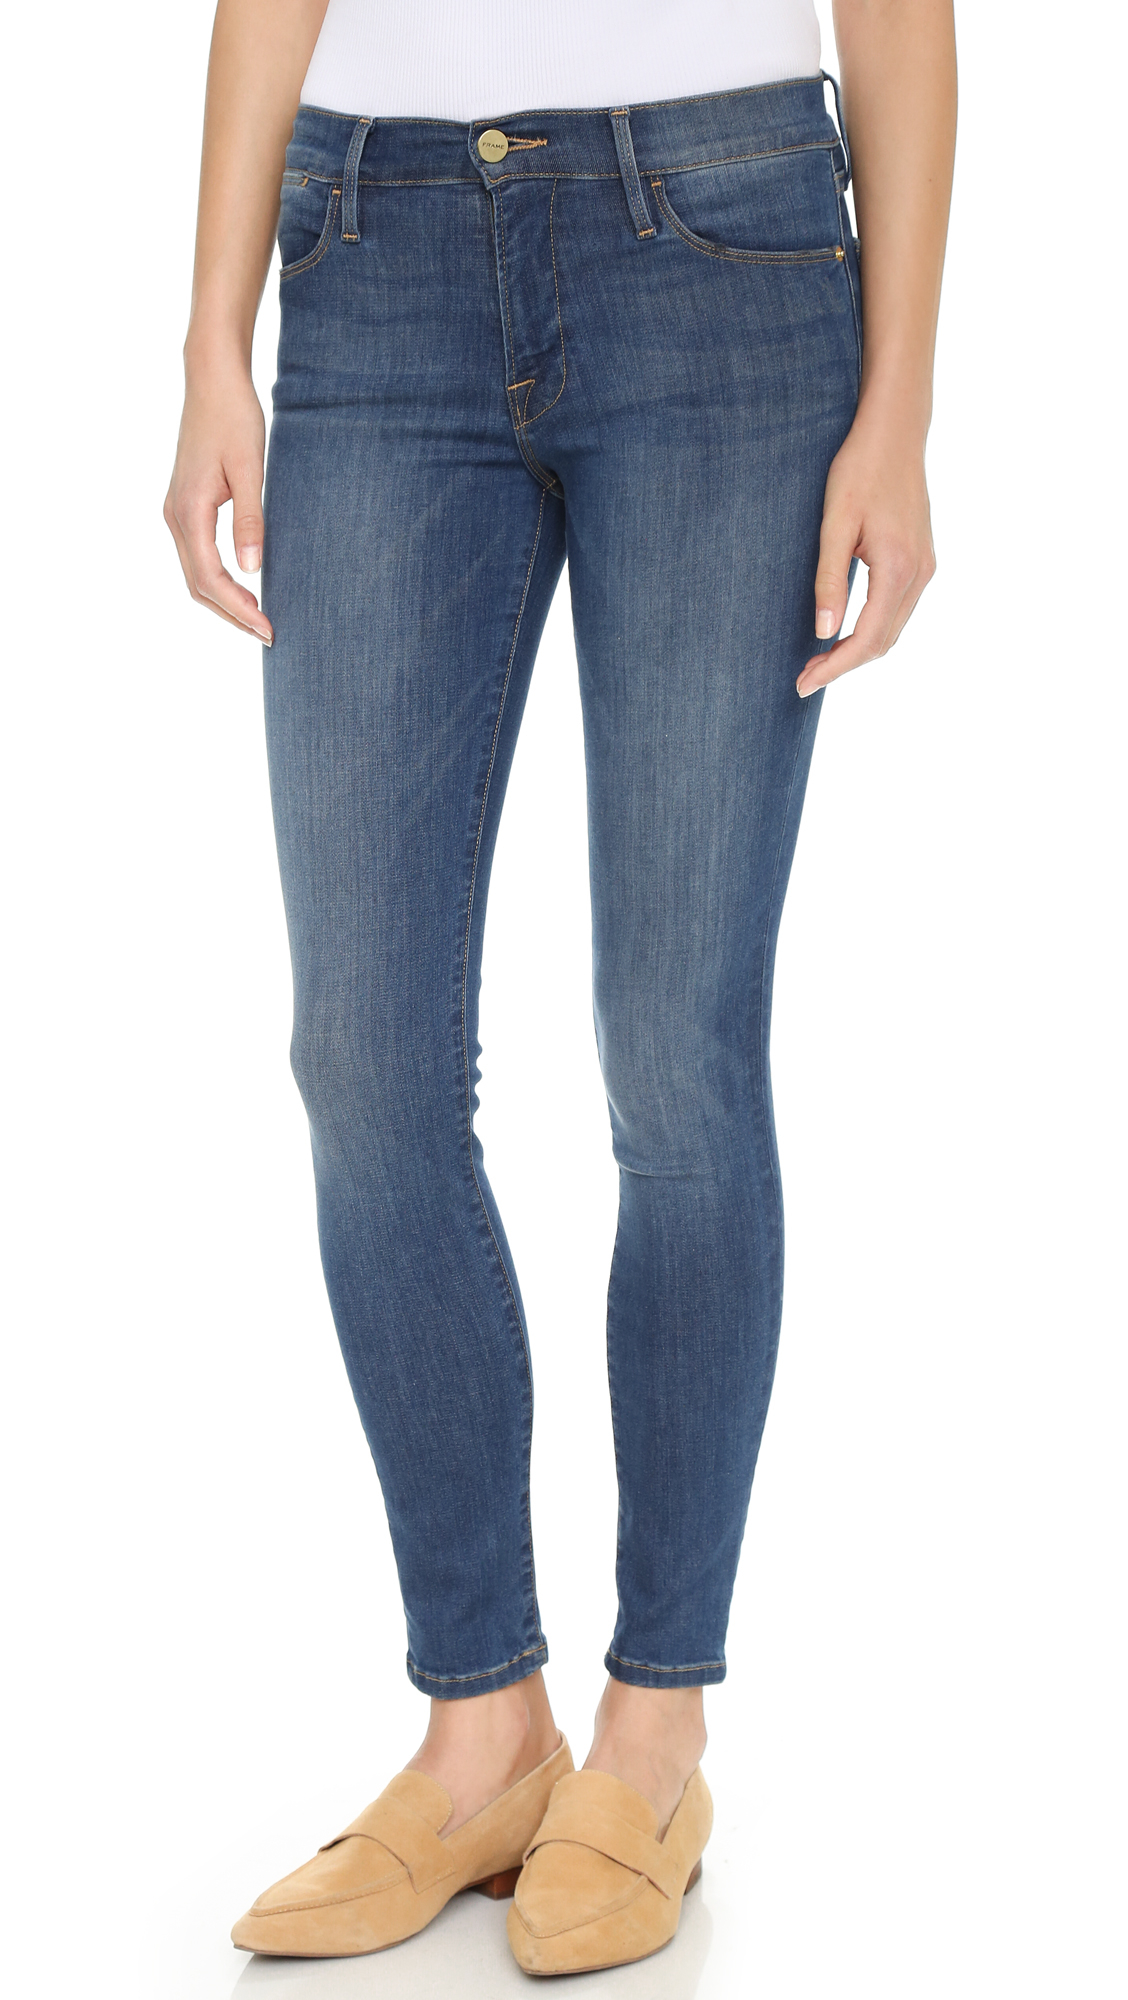 Lyst - Frame Le High Skinny Jeans in Blue